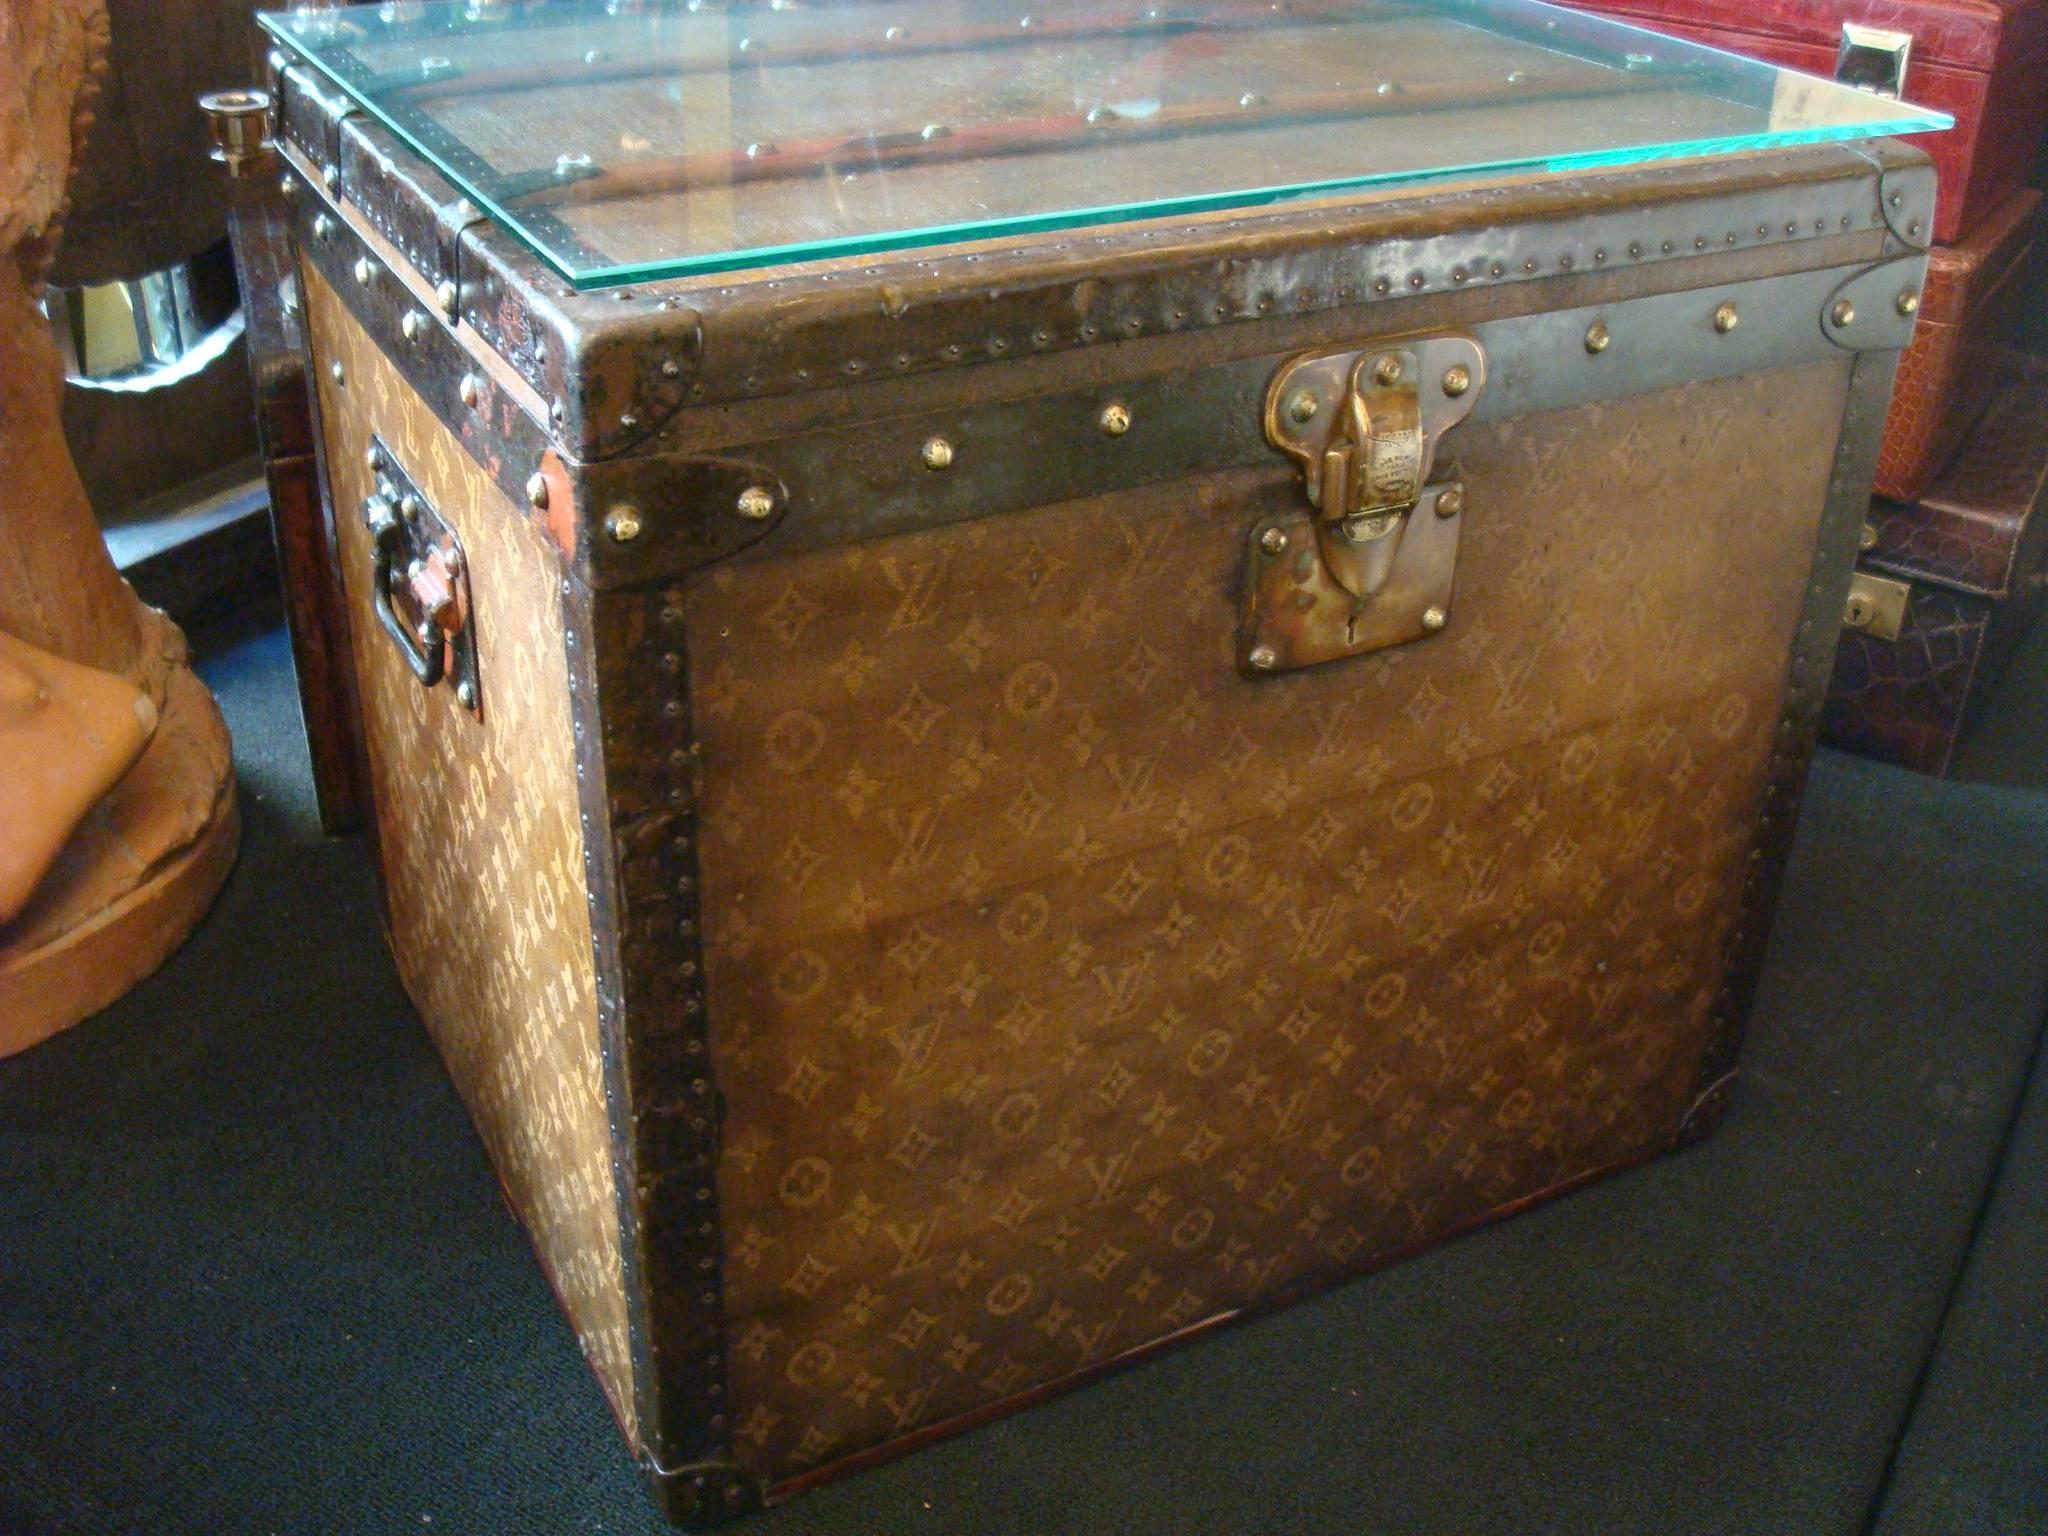 1890s woven canvas Louis Vuitton Tisse monogram steamer hat trunk side table. It has the perfect size to be a sofa side table. It's prepared for that, as it has a glass.
Louis Vuitton woven canvas monogram hat trunk.
Brass lock. Steel handle and